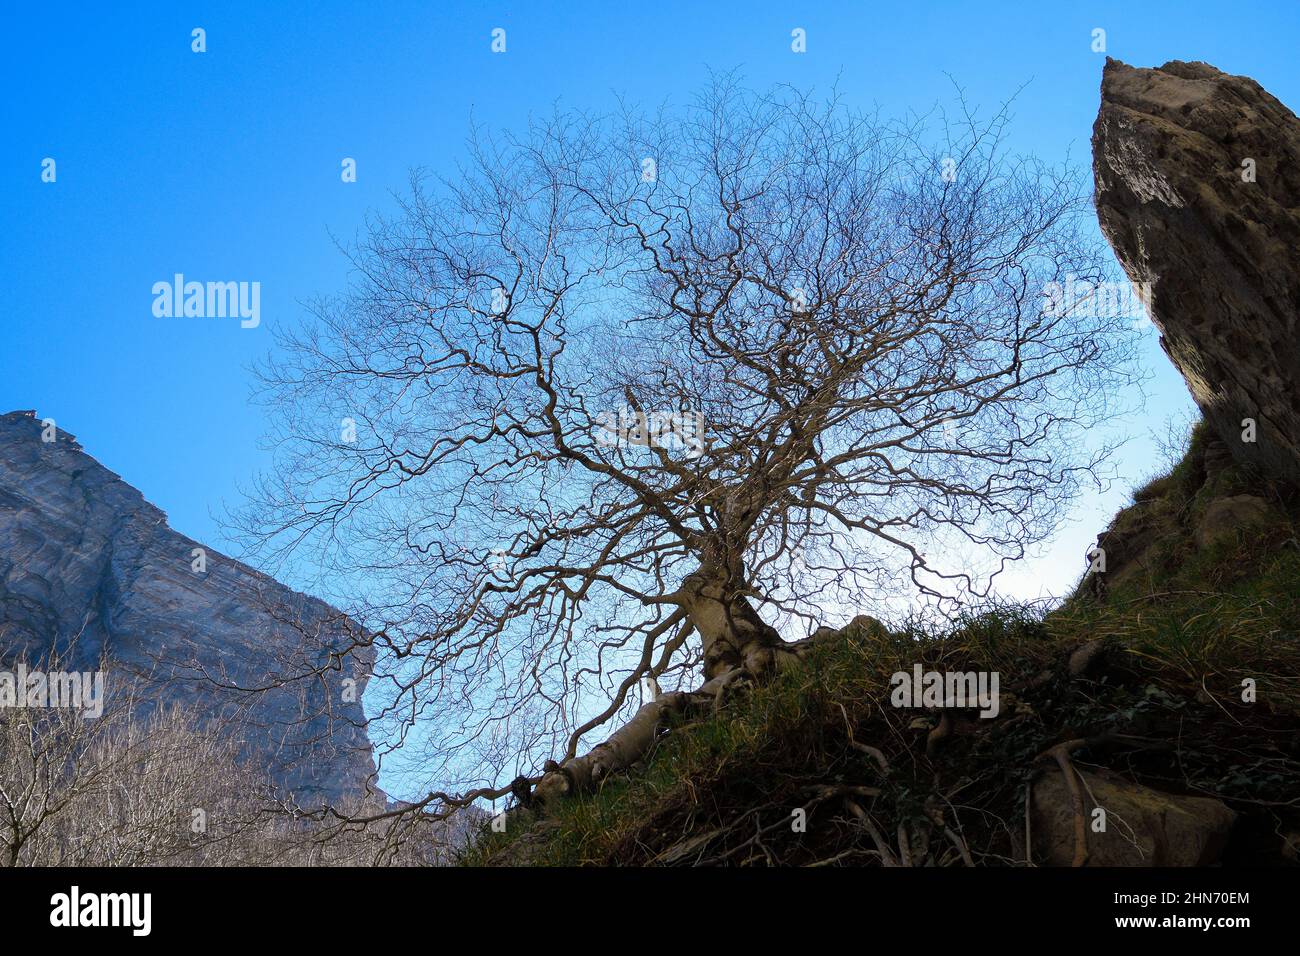 Silhouette of a tree without leaves among the rocks of Delika Stock Photo